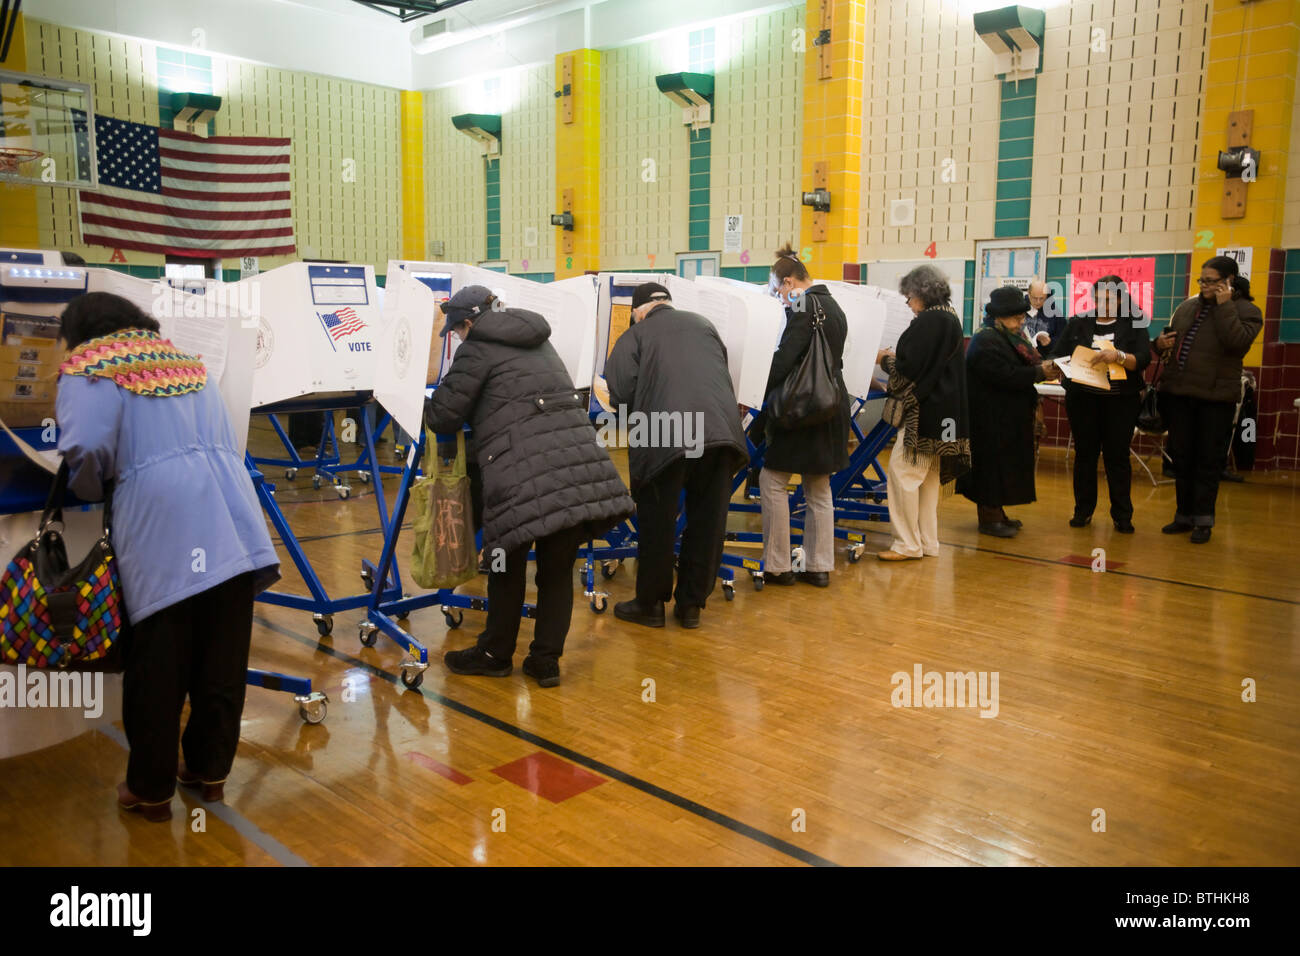 Voters cast their ballots in New York in Washington Heights on election day Stock Photo